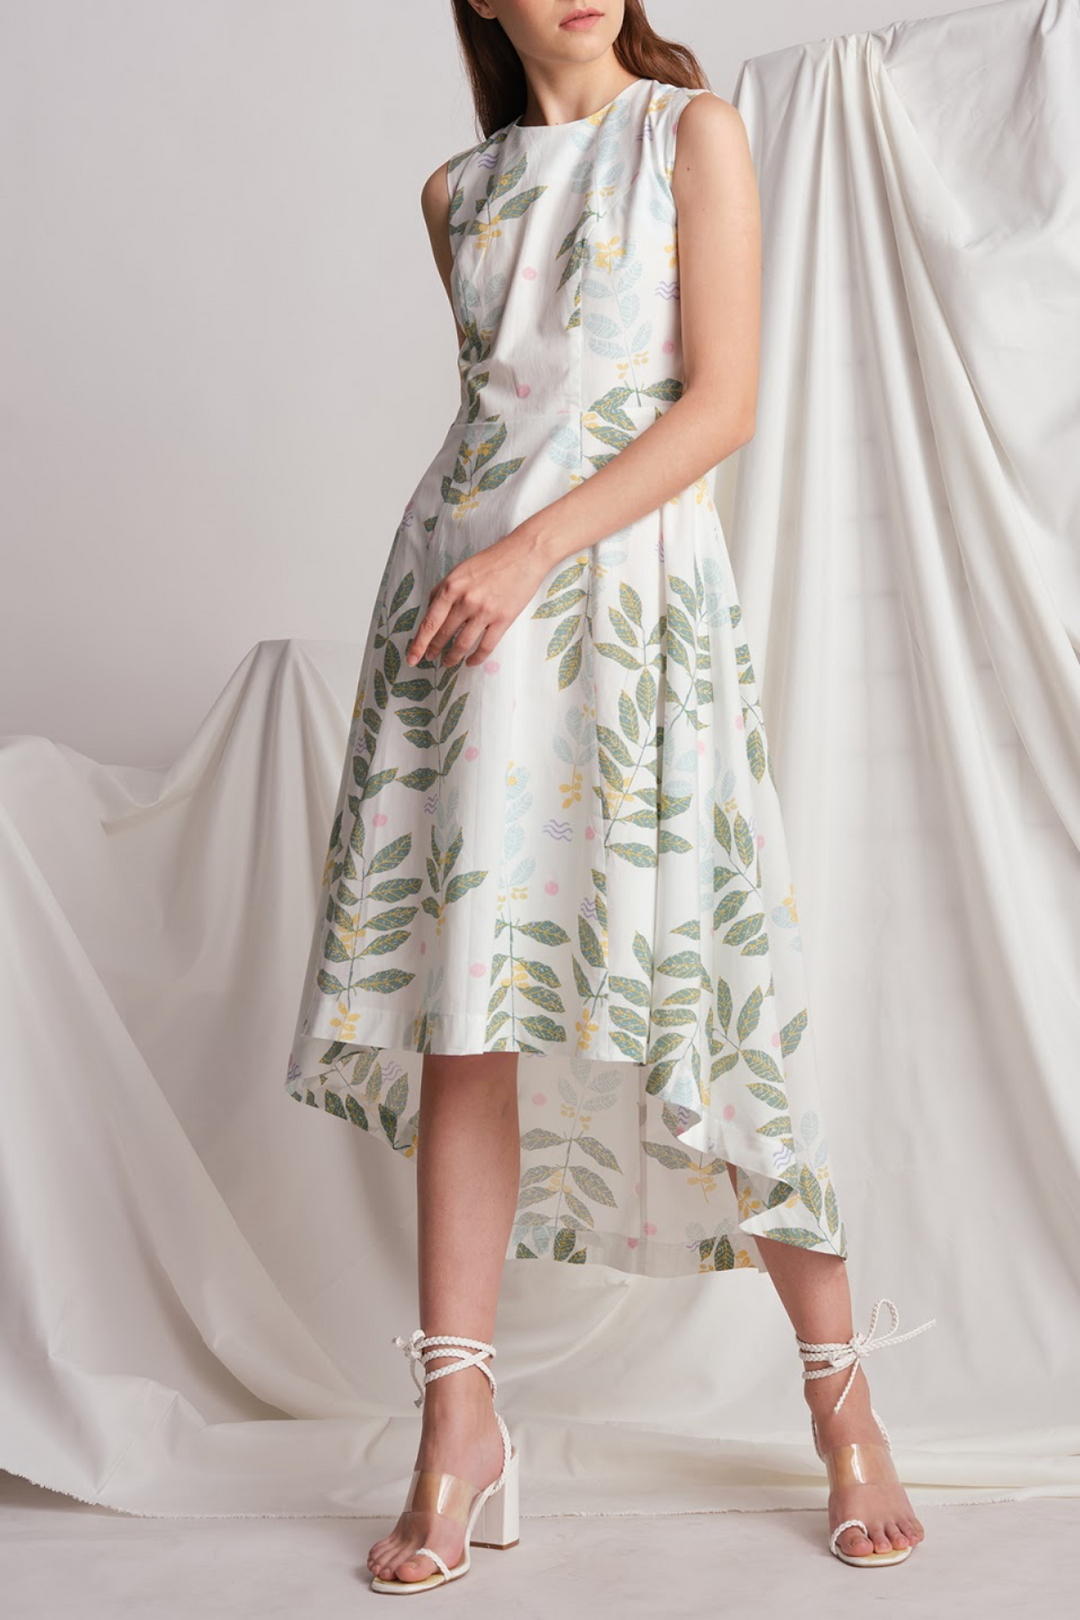 Lily & Lou Alicia Dress in Leafy, available in ZERRIN